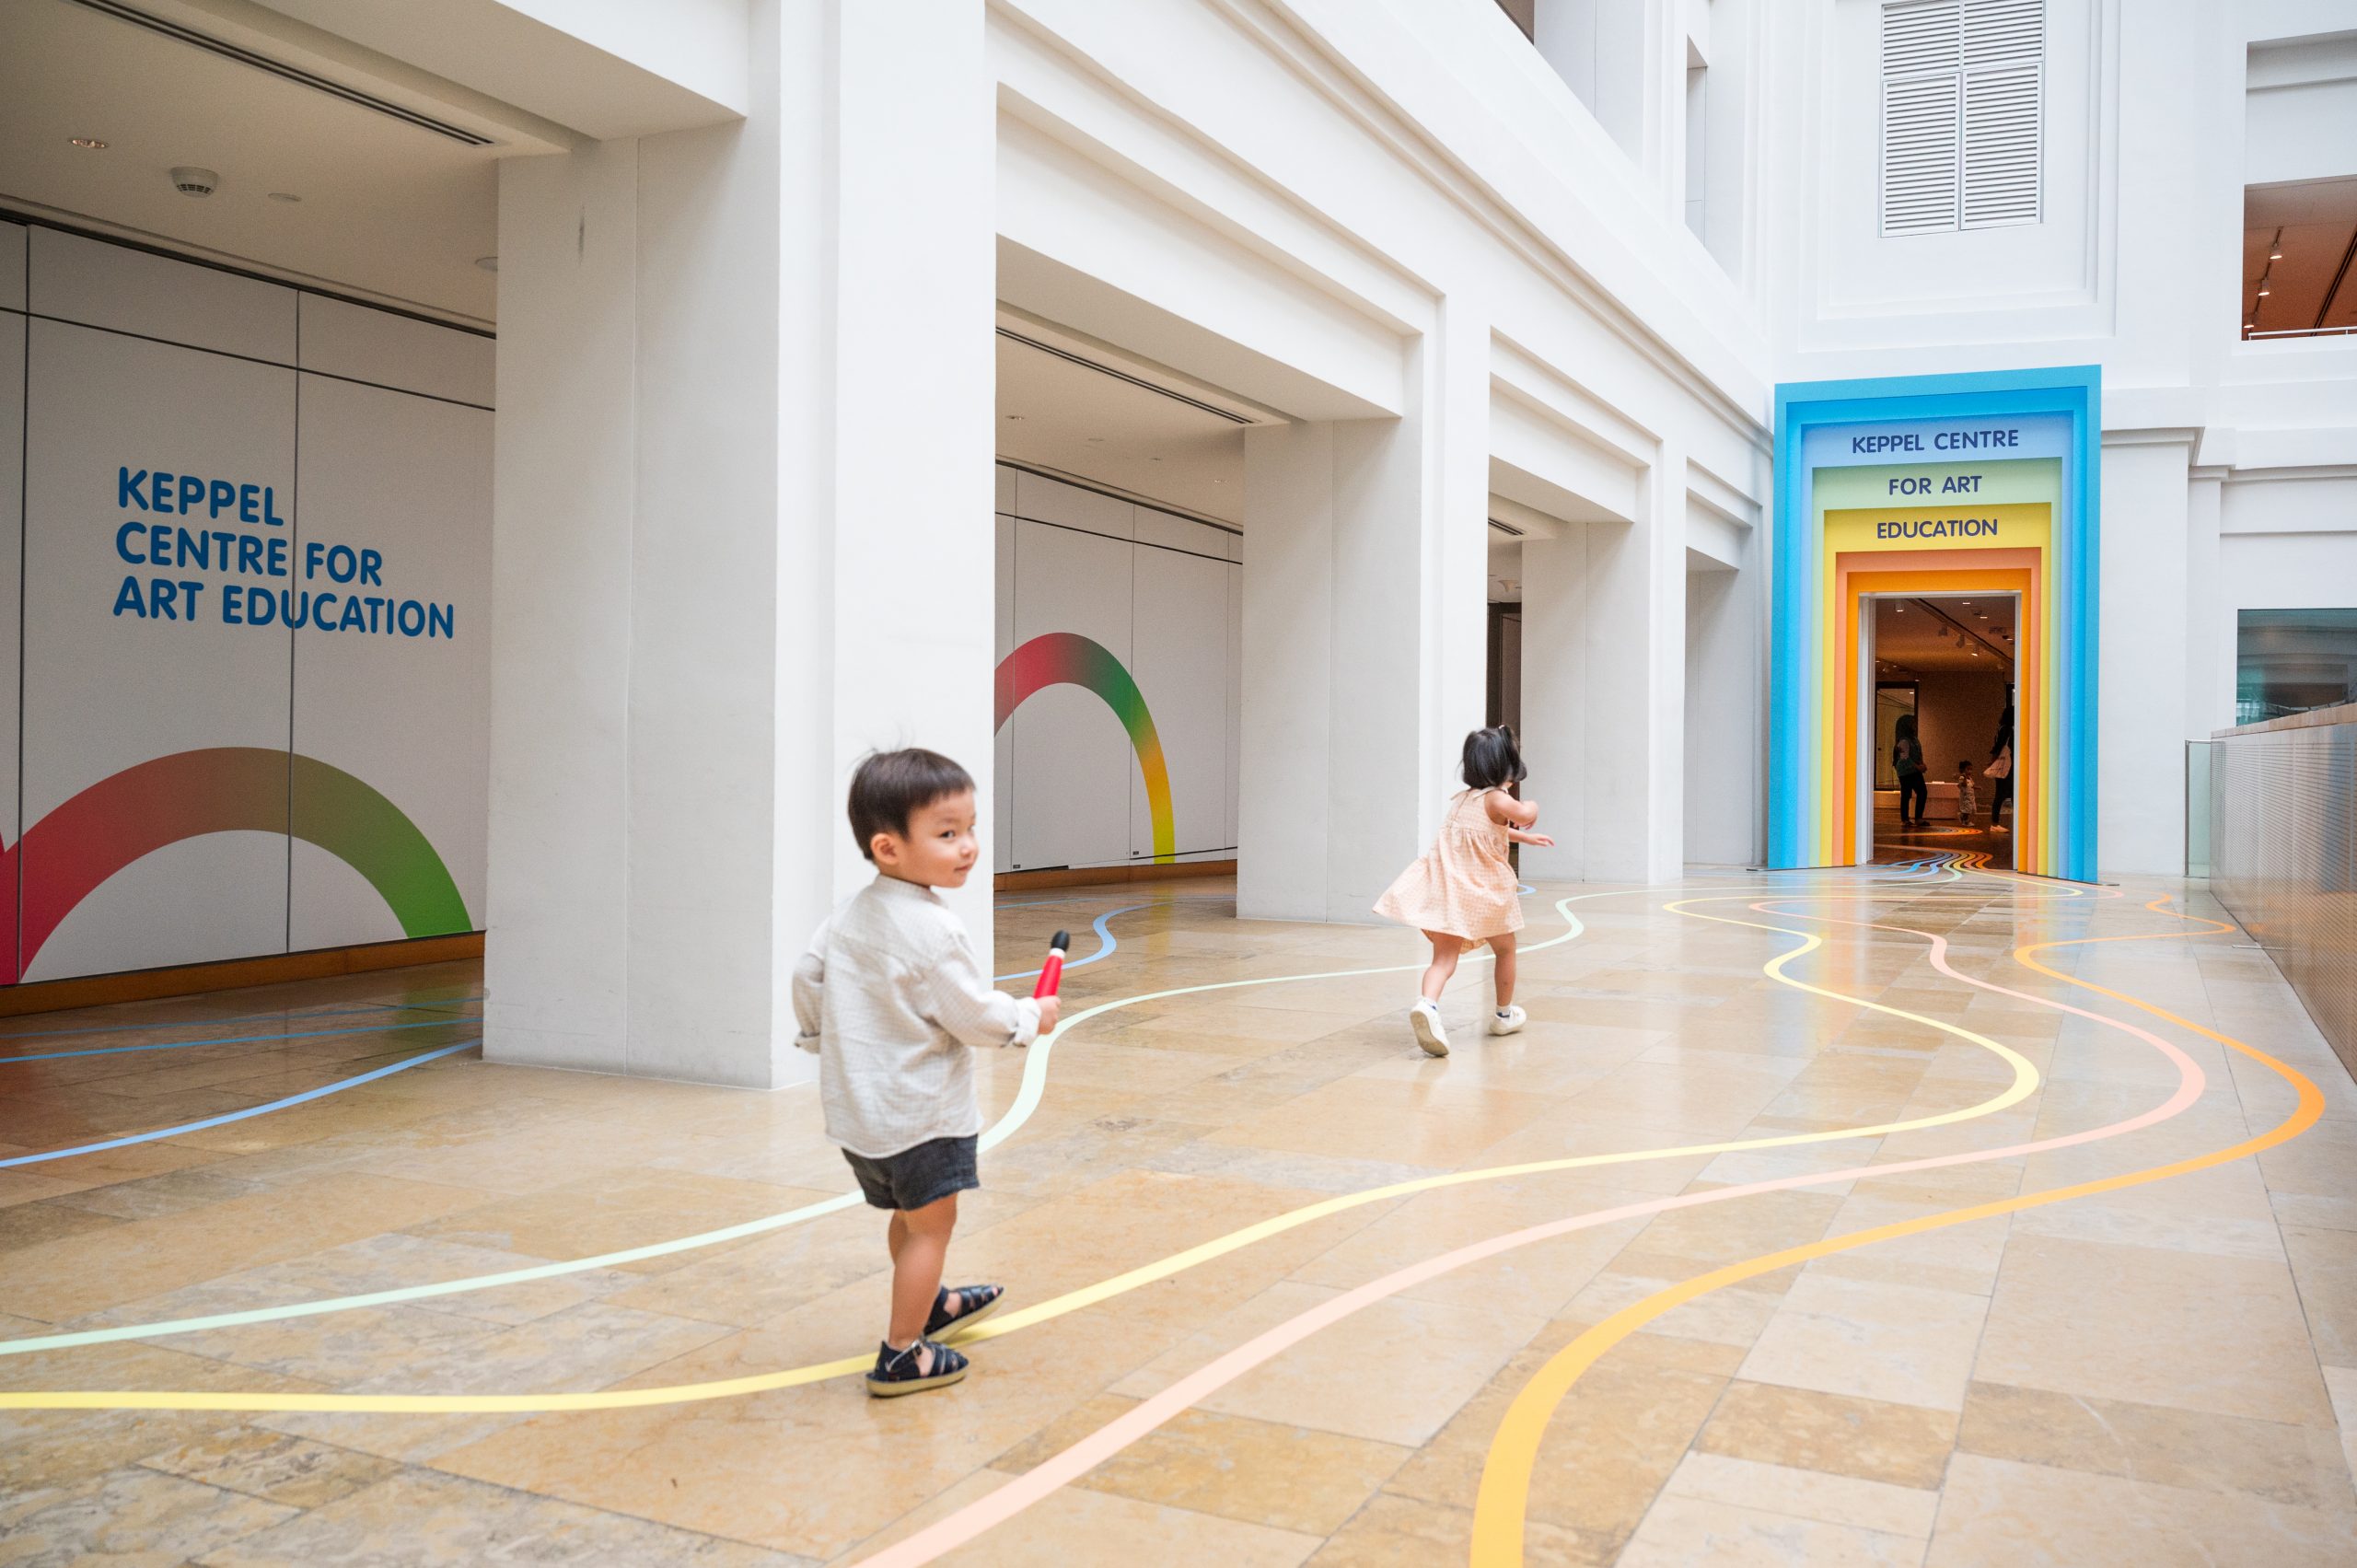 Keppel Centre for Art Education Image 1. Image Courtesy of National Gallery Singapore